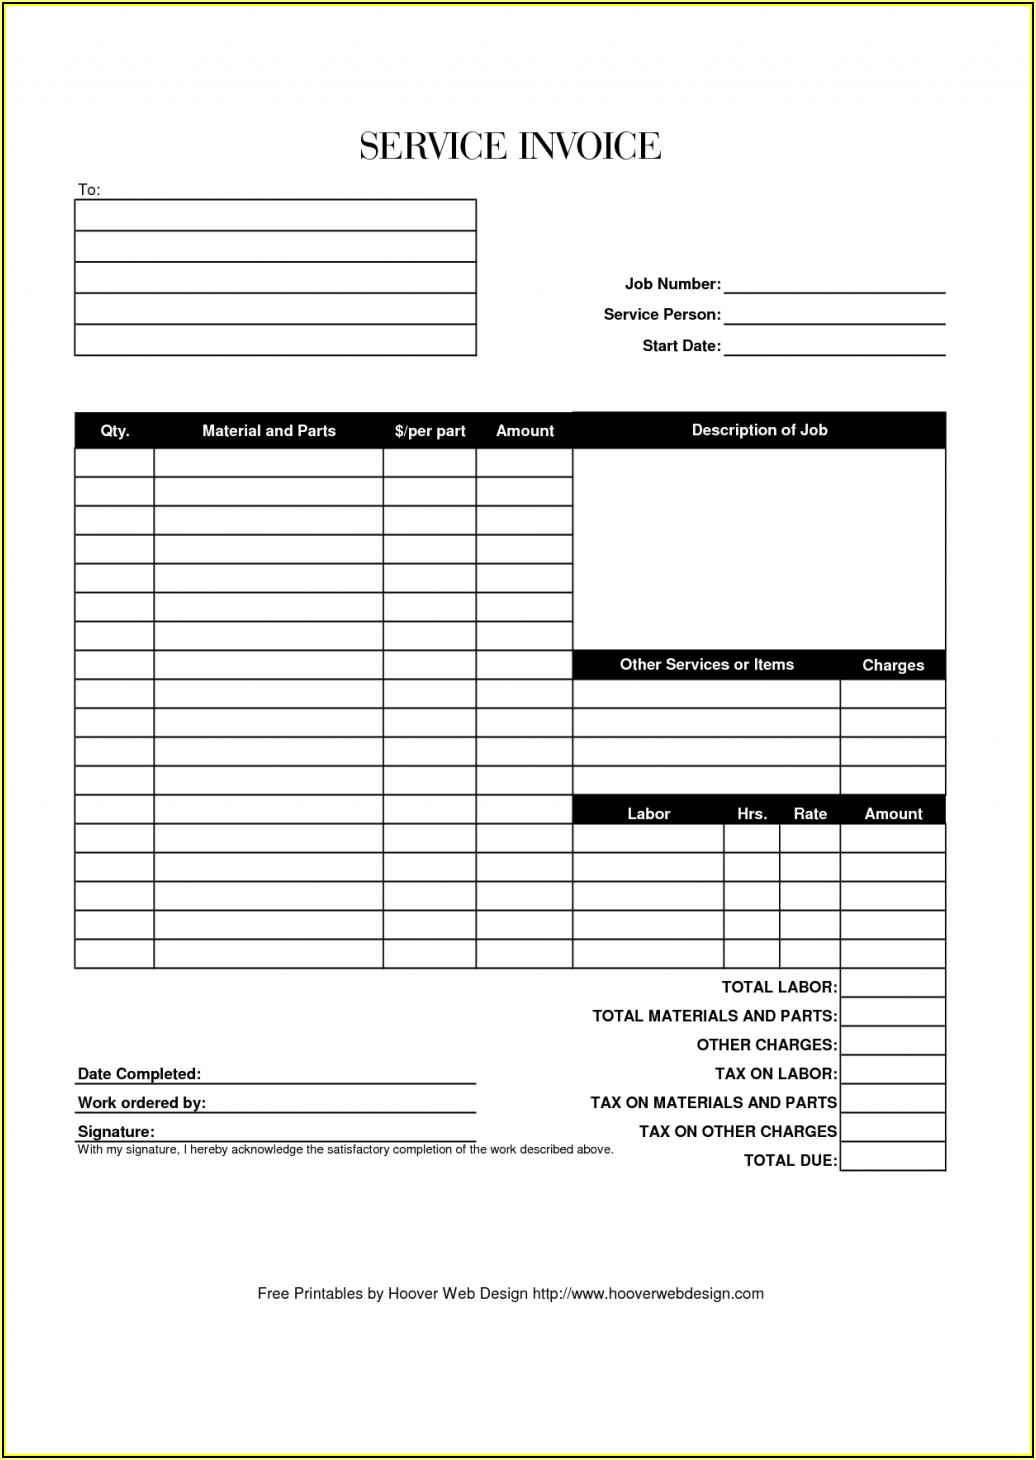 Free Downloadable Invoice Template Excel